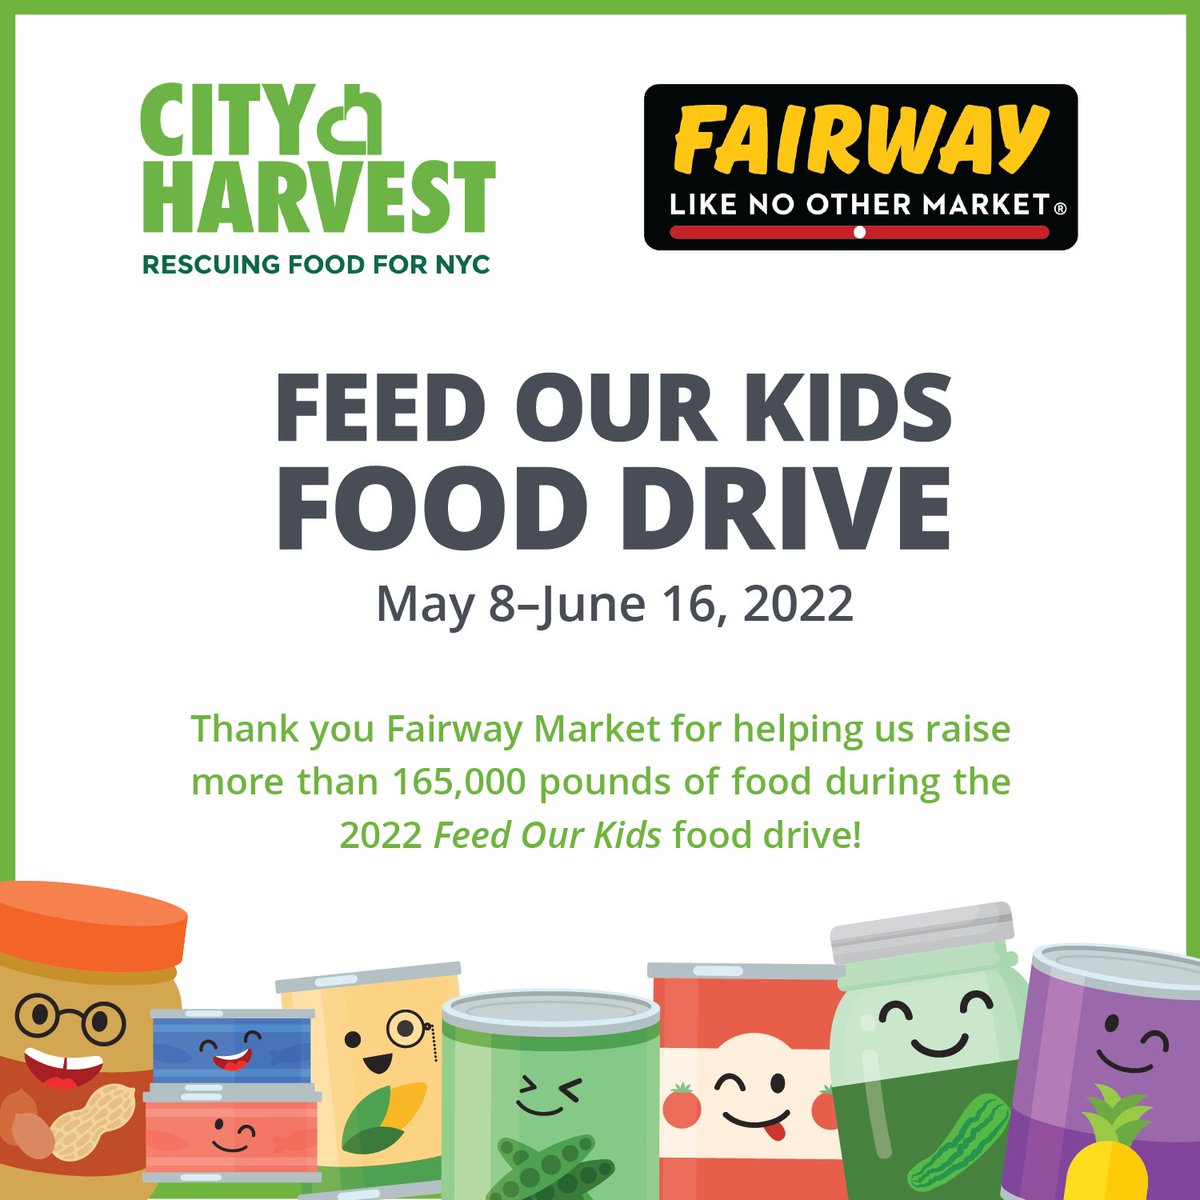 This year, our Fairway stores were a sponsor of @CityHarvest 's Feed Our Kids Food Drive. This food drive aims to help provide much needed food for New York City’s children and their families, especially during summer, when access to free schools meals may become limited.